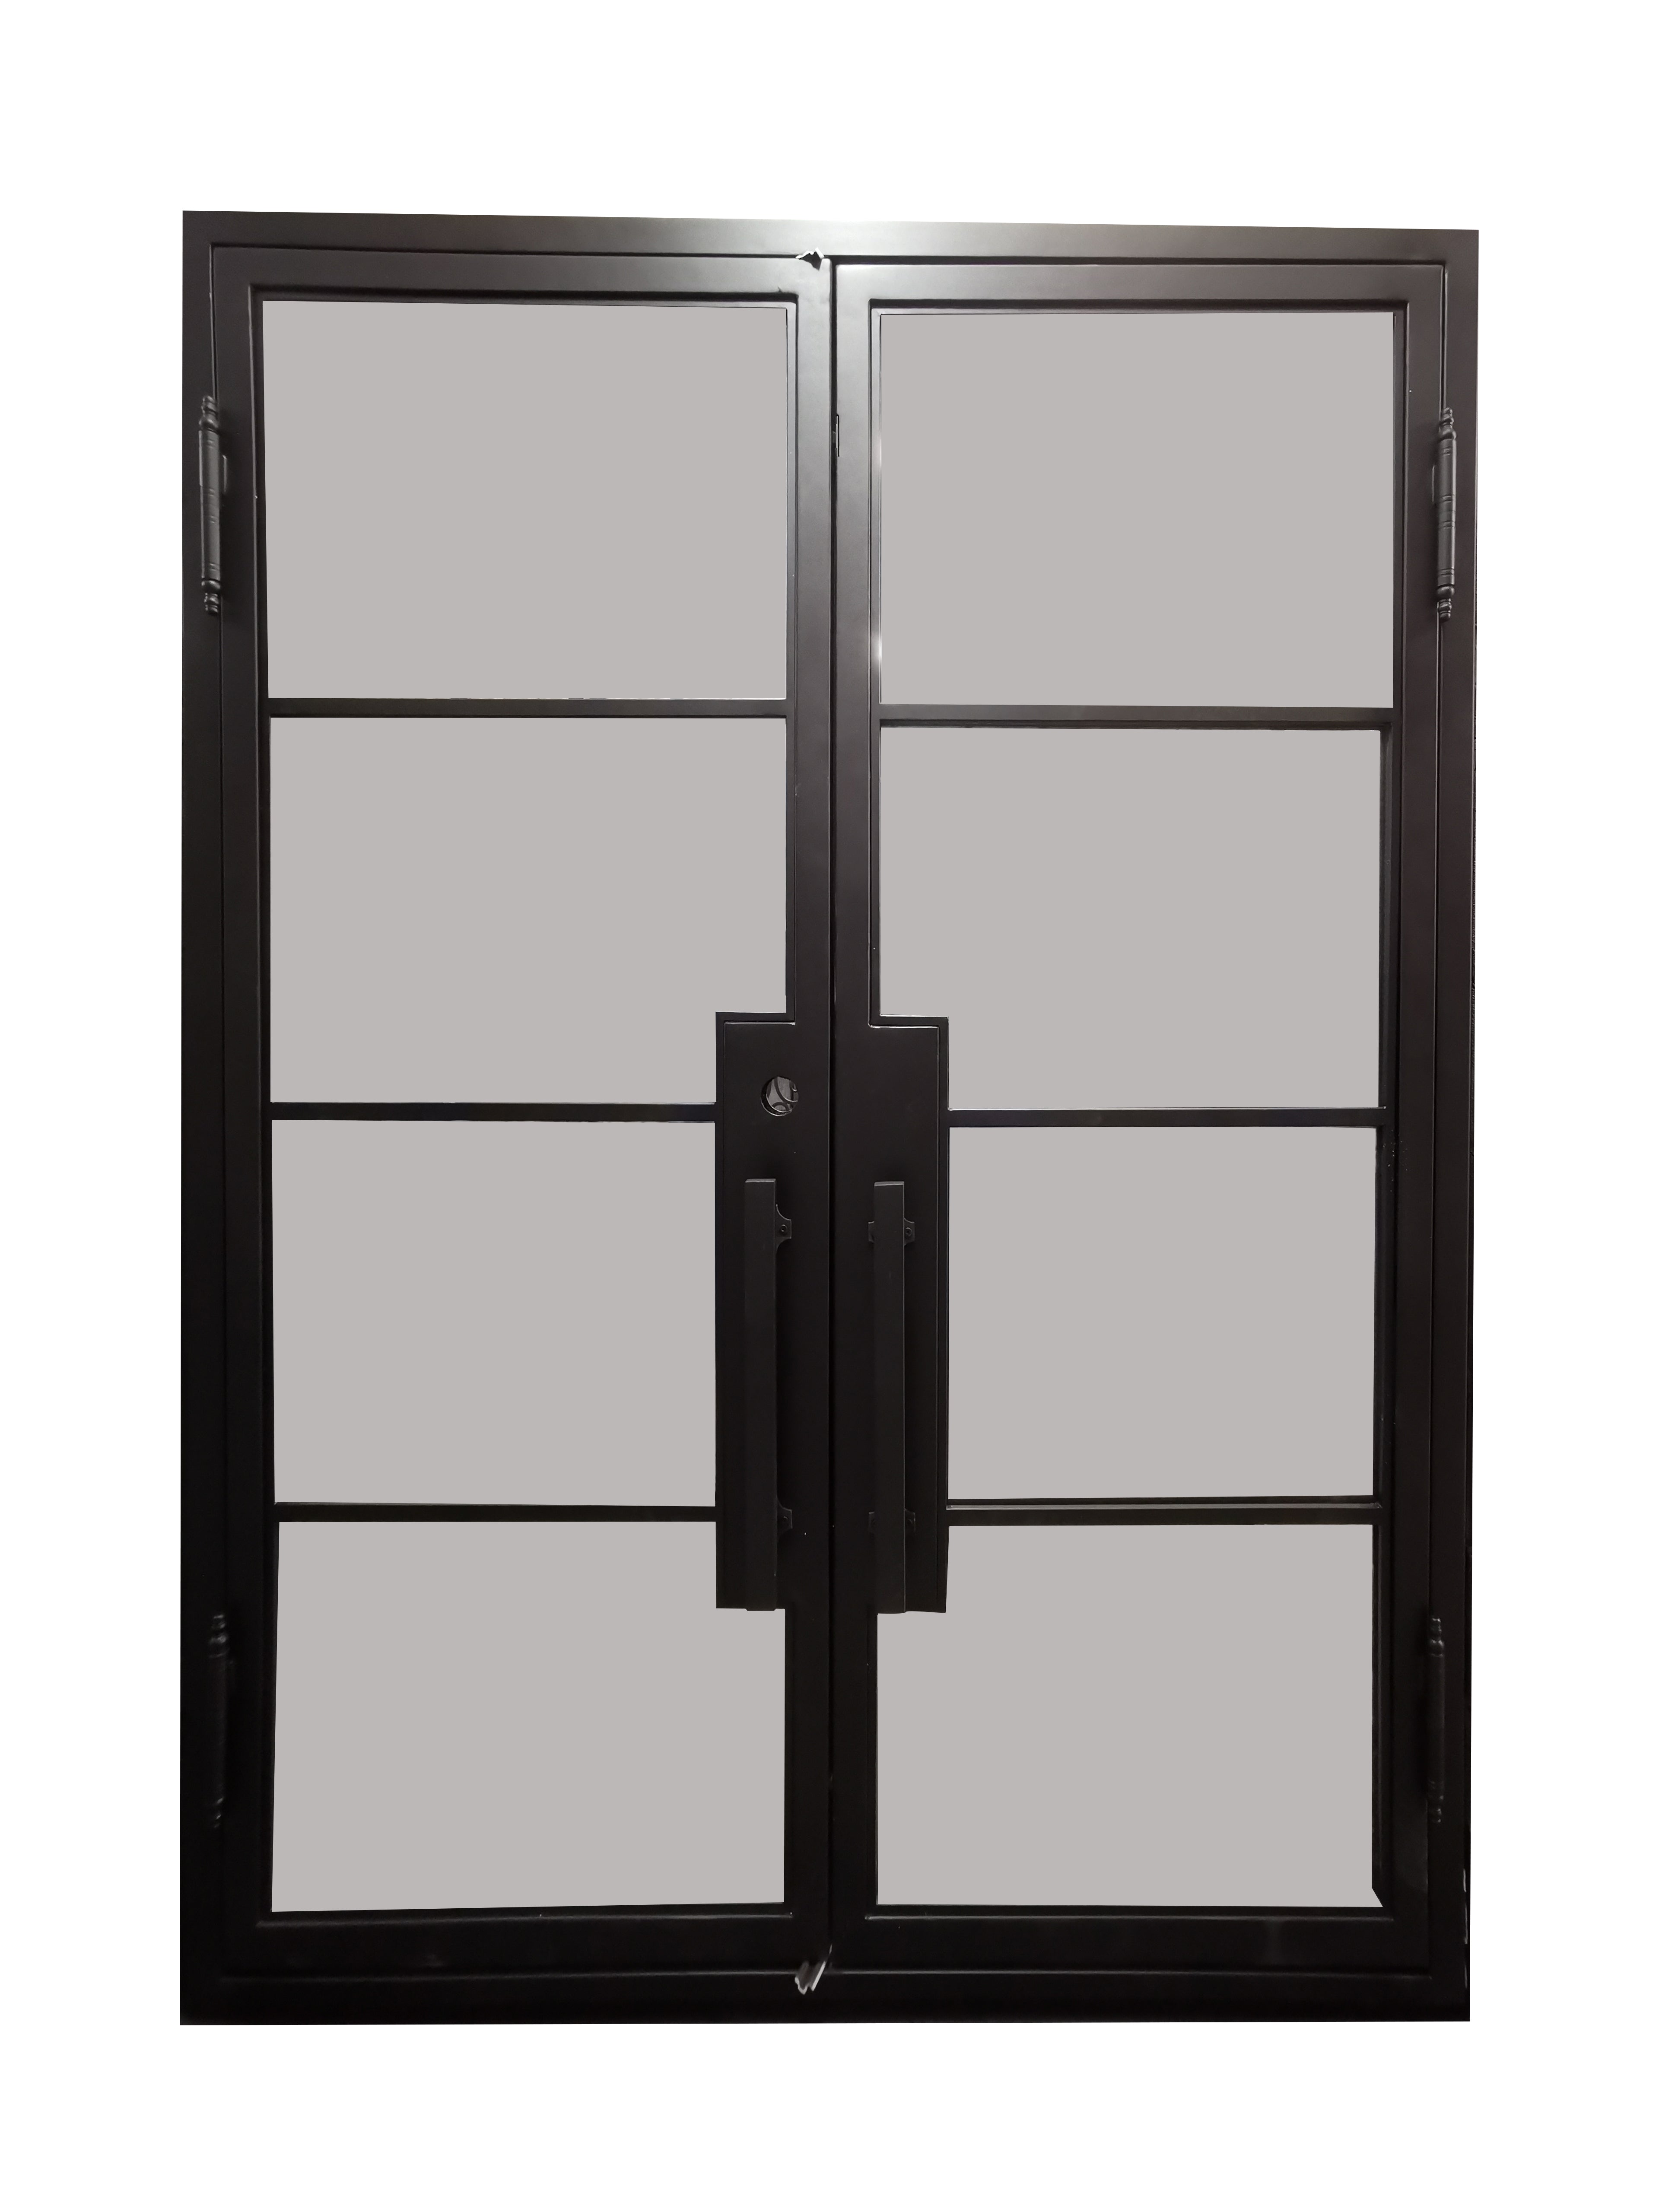 Dallas Double Front Entry Iron Door With Tempered Low E Clear Glass Matt Black Finish - AAWAIZ IMPORTS